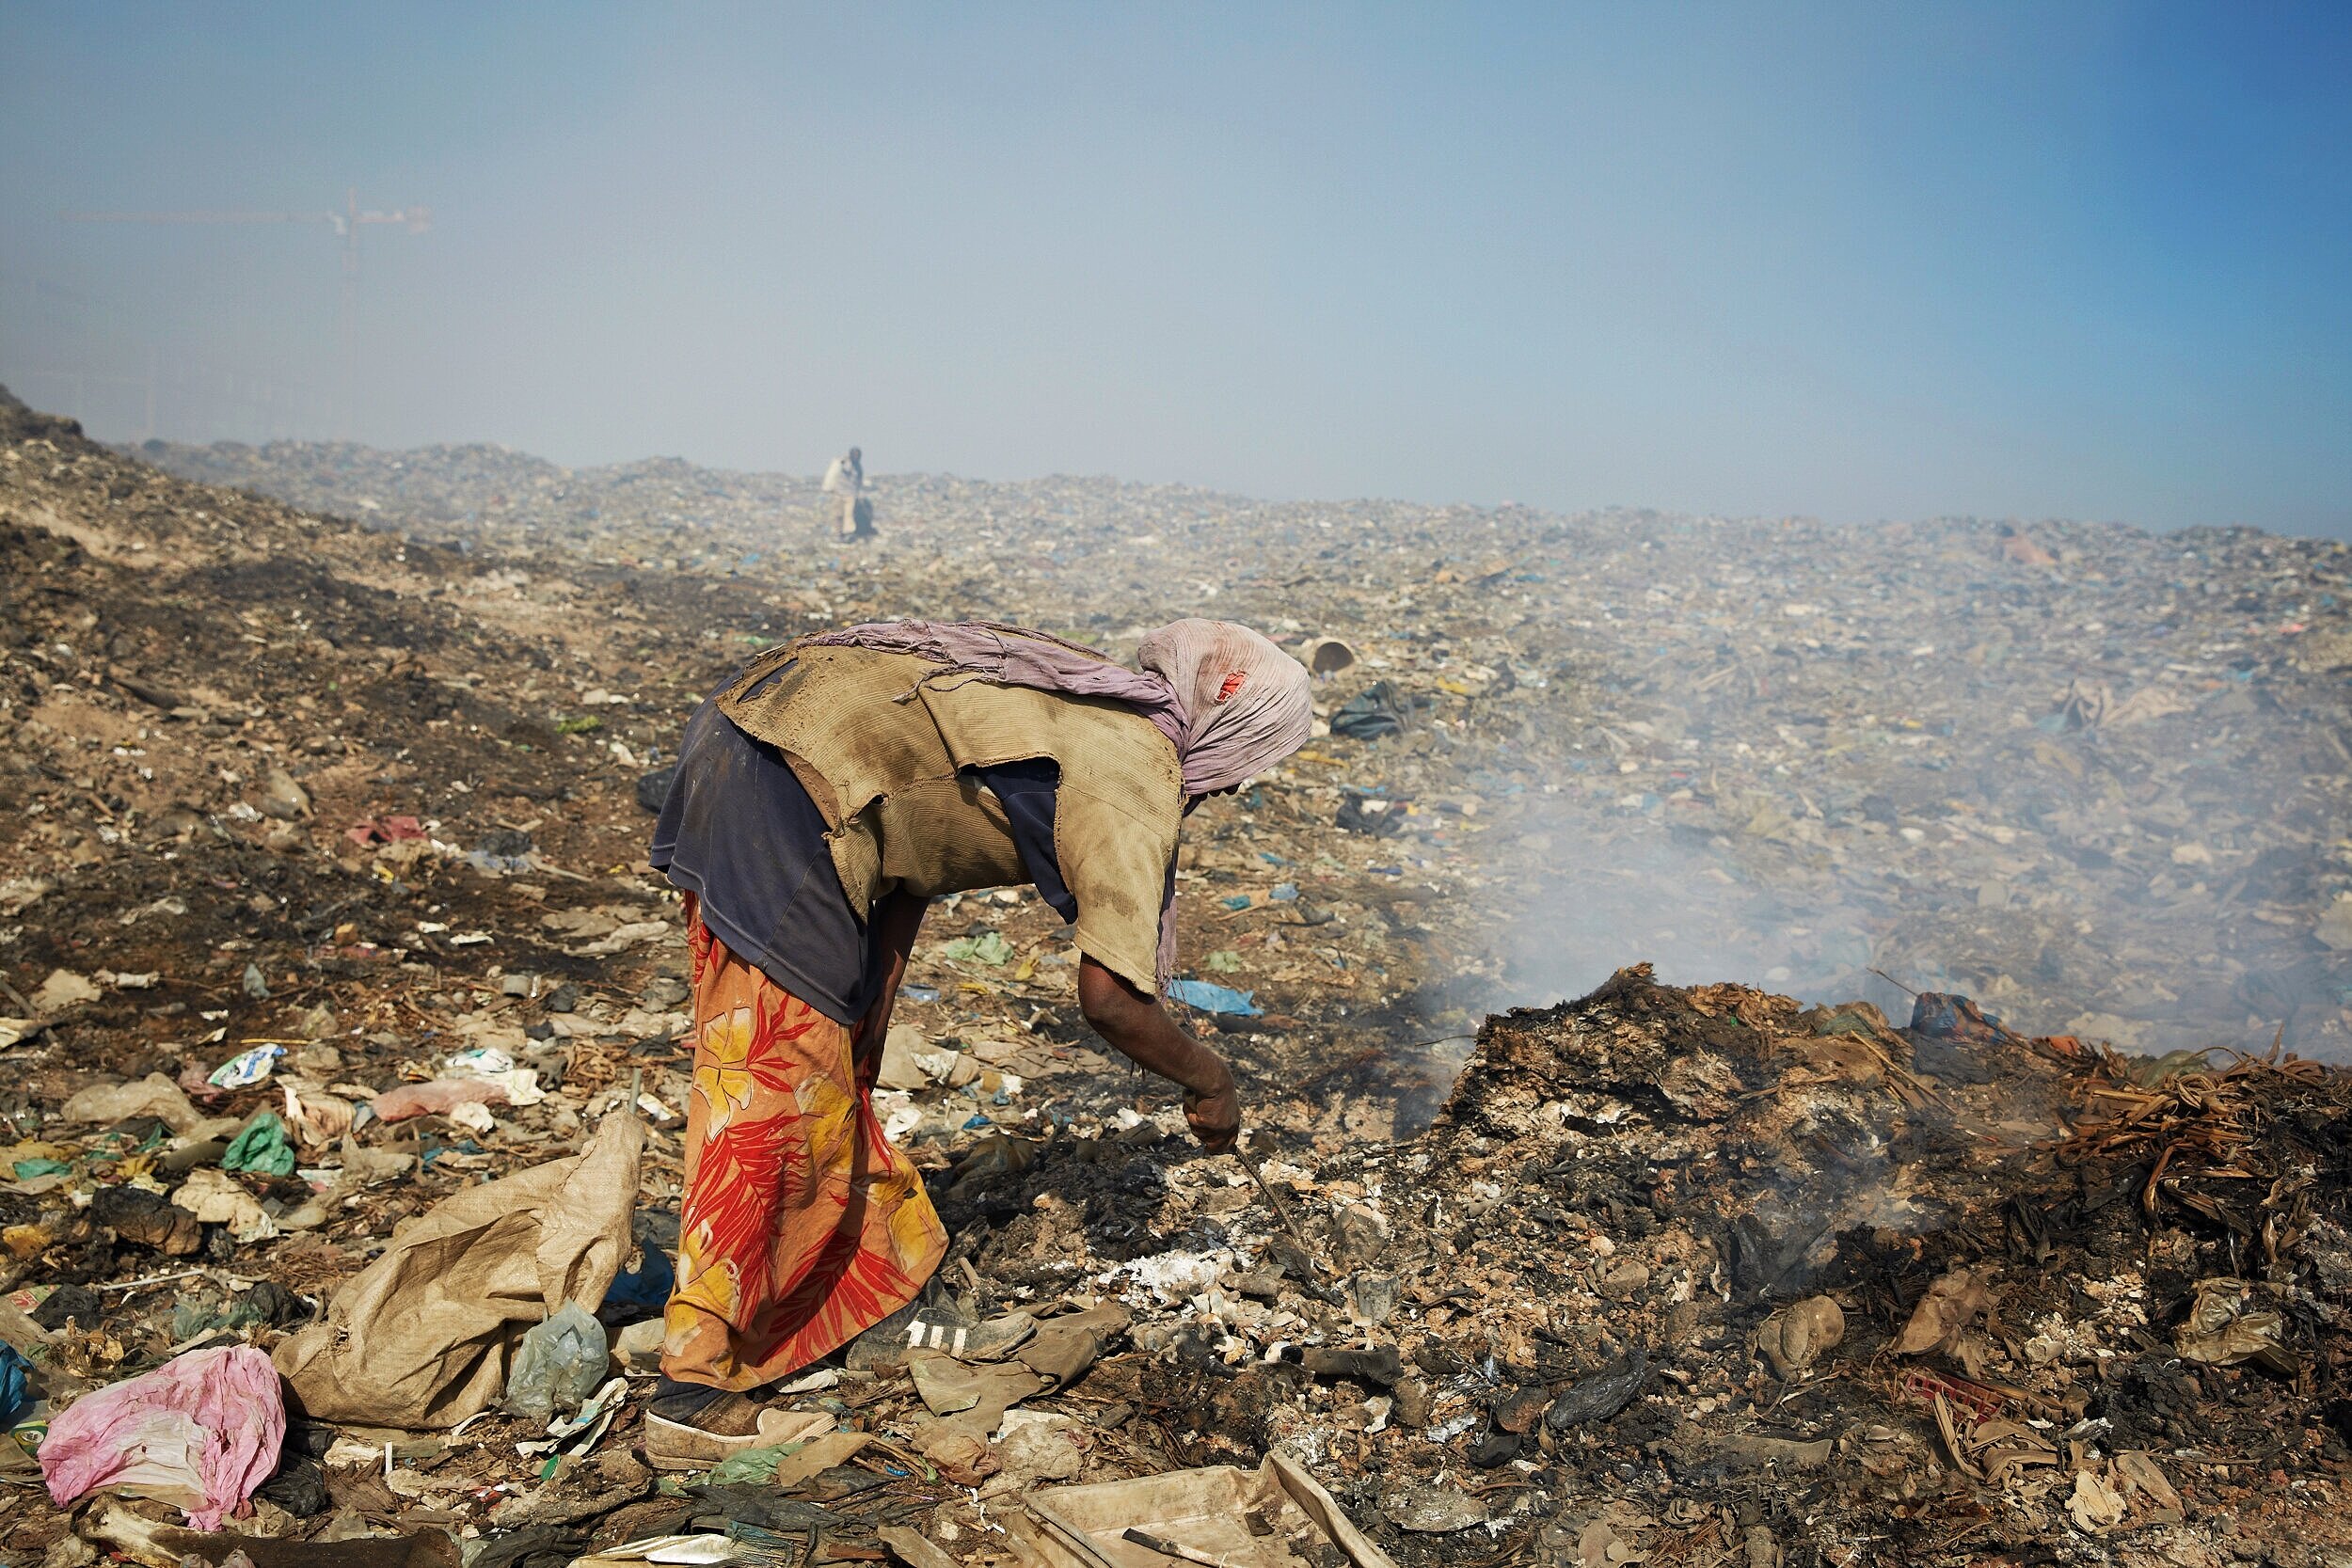  Liya Getachew, 26, sifts through rubbish in search of small metal items that she can resell. Each picker generally specializes in a material with the majority of women choosing metal as it requires a certain level of meticulousness. She started work